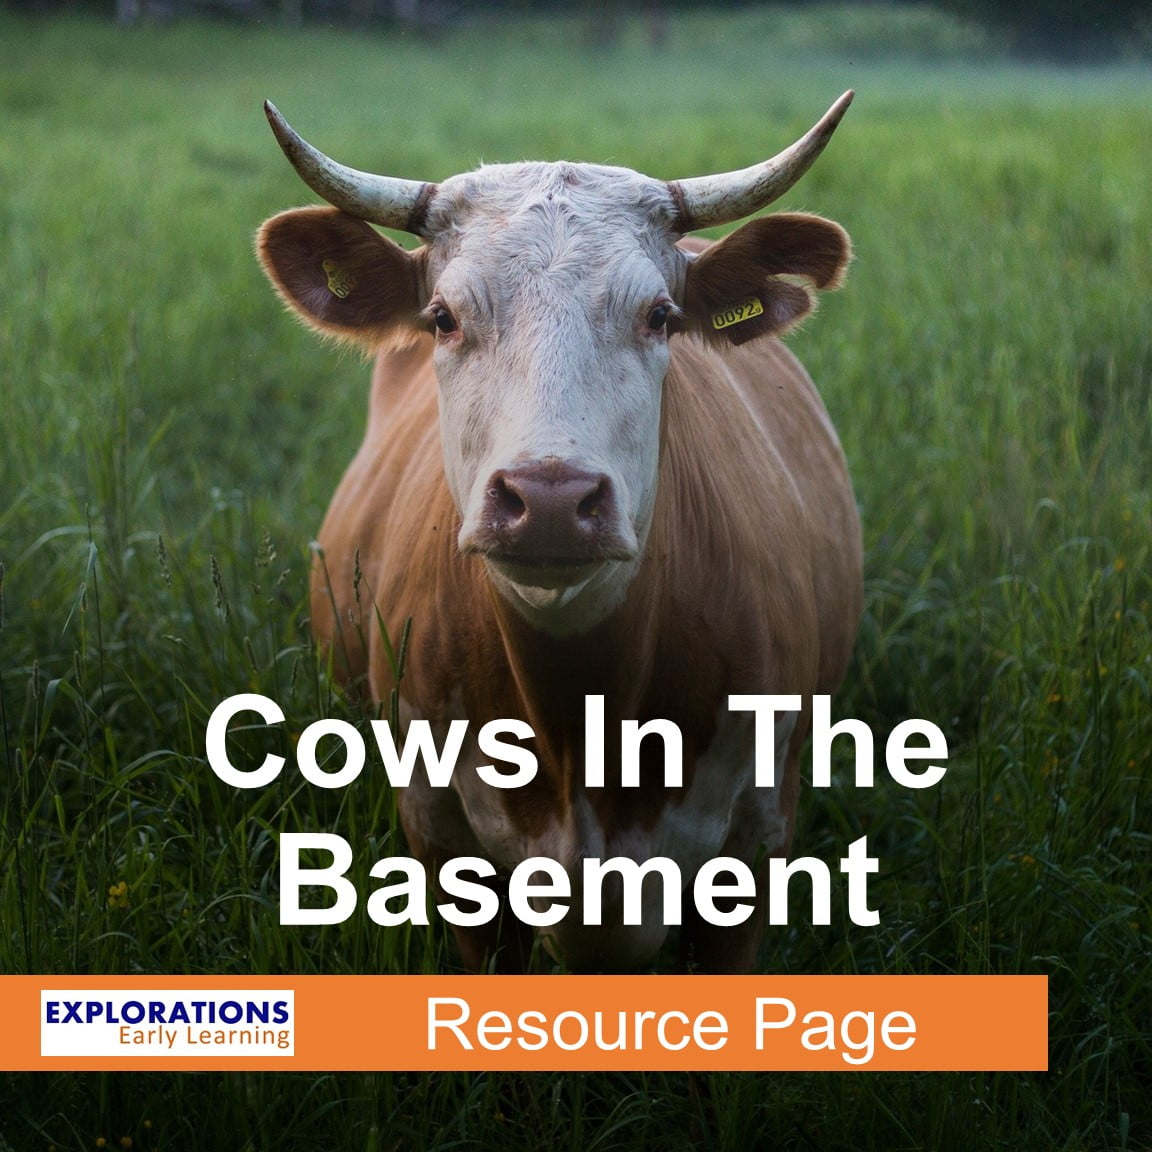 Cows In The Basement